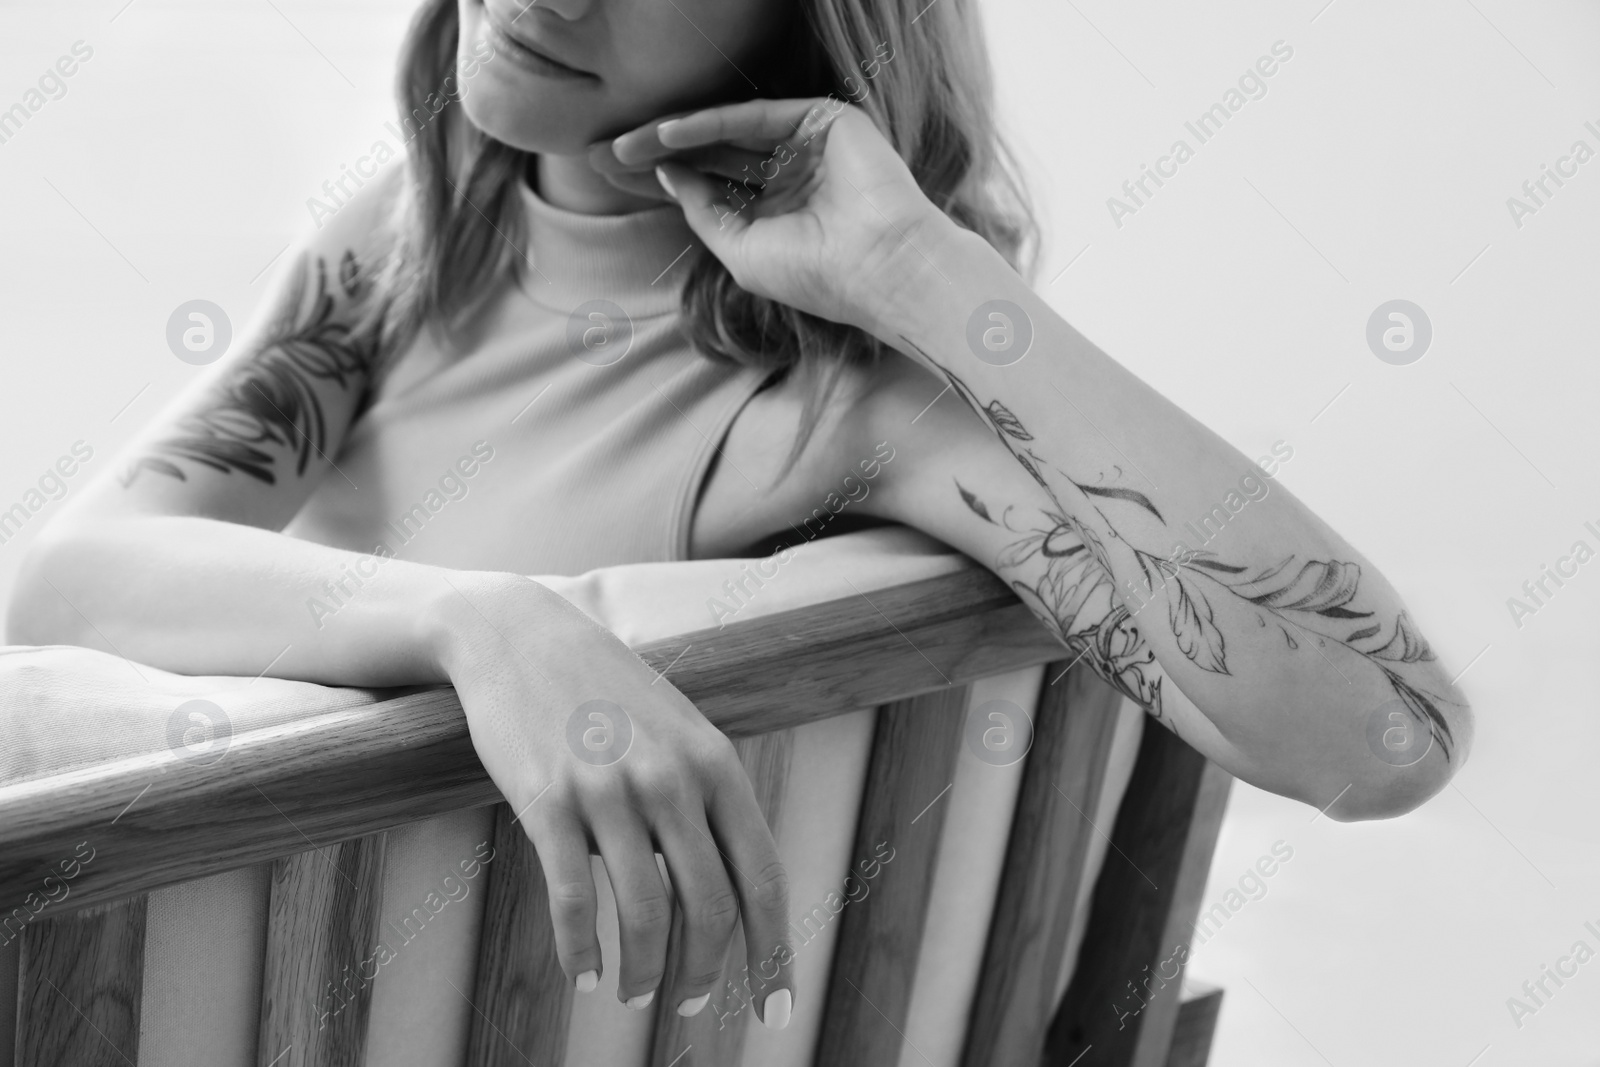 Image of Beautiful woman with tattoos on arms resting indoors, closeup. Black and white photography